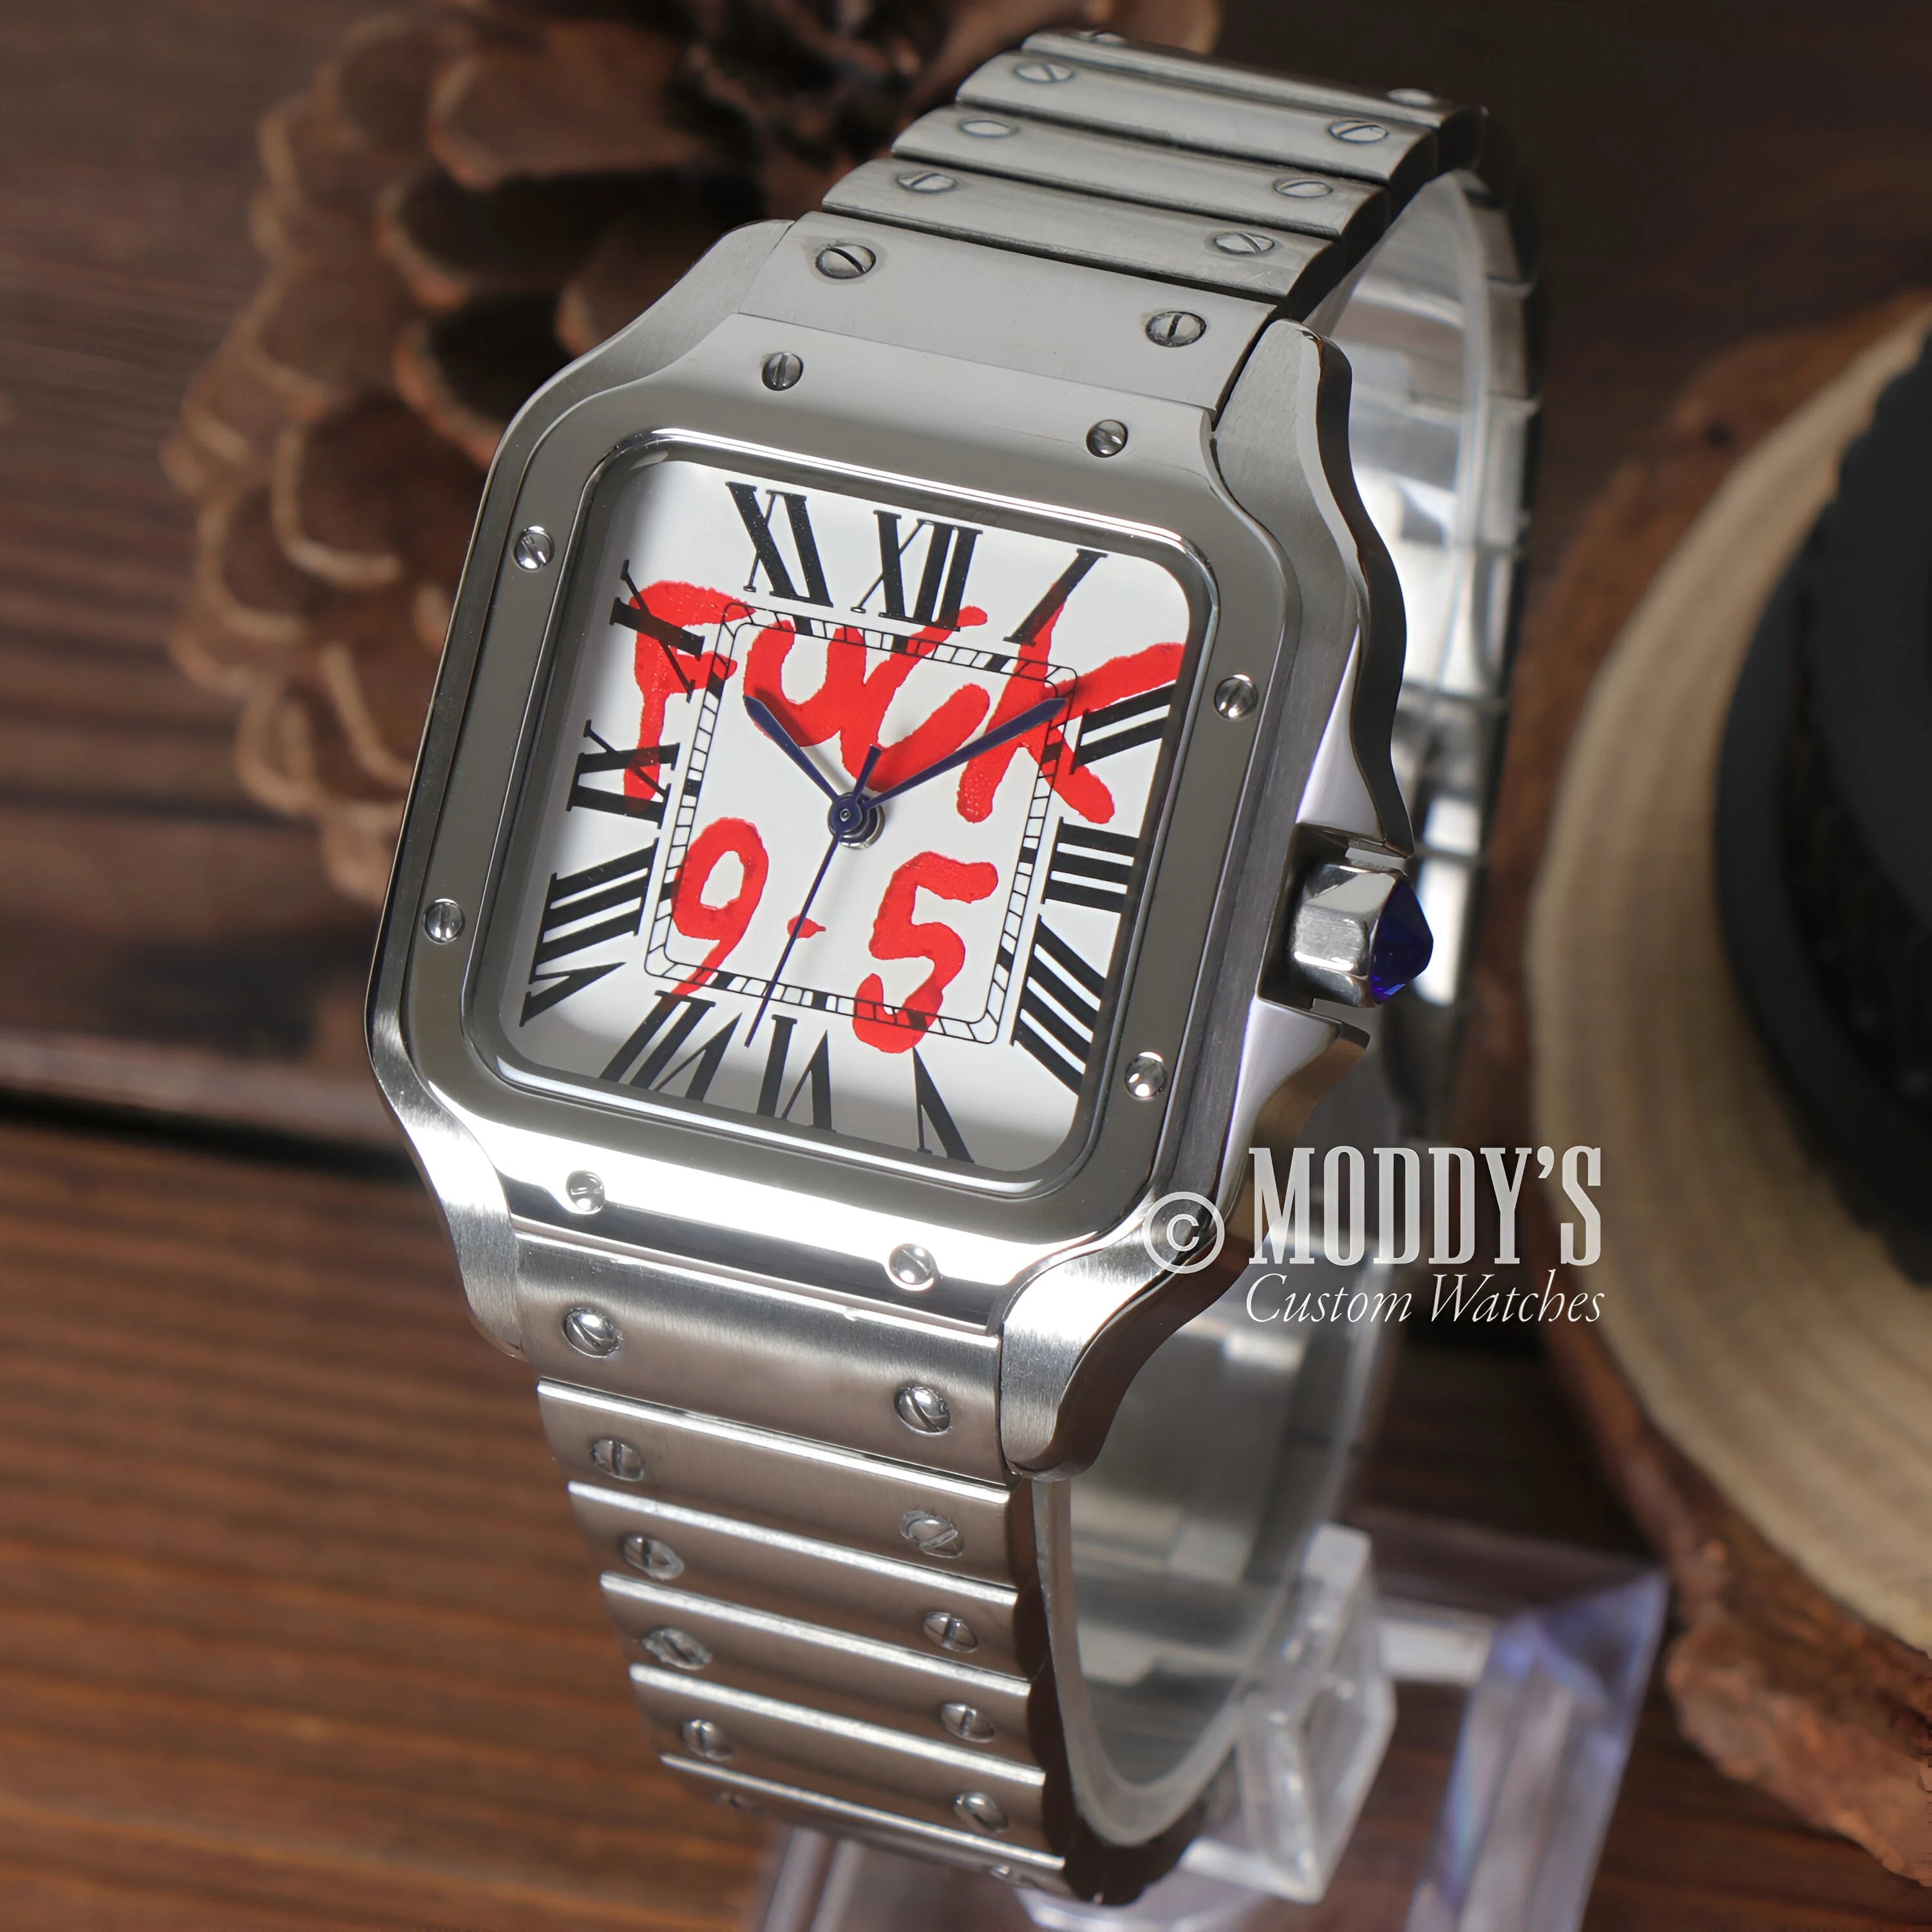 Luxury Wristwatch With Seiko Nh35 Automatic In 904l Stainless Steel, ’fuck 9-5’ Text On Dial